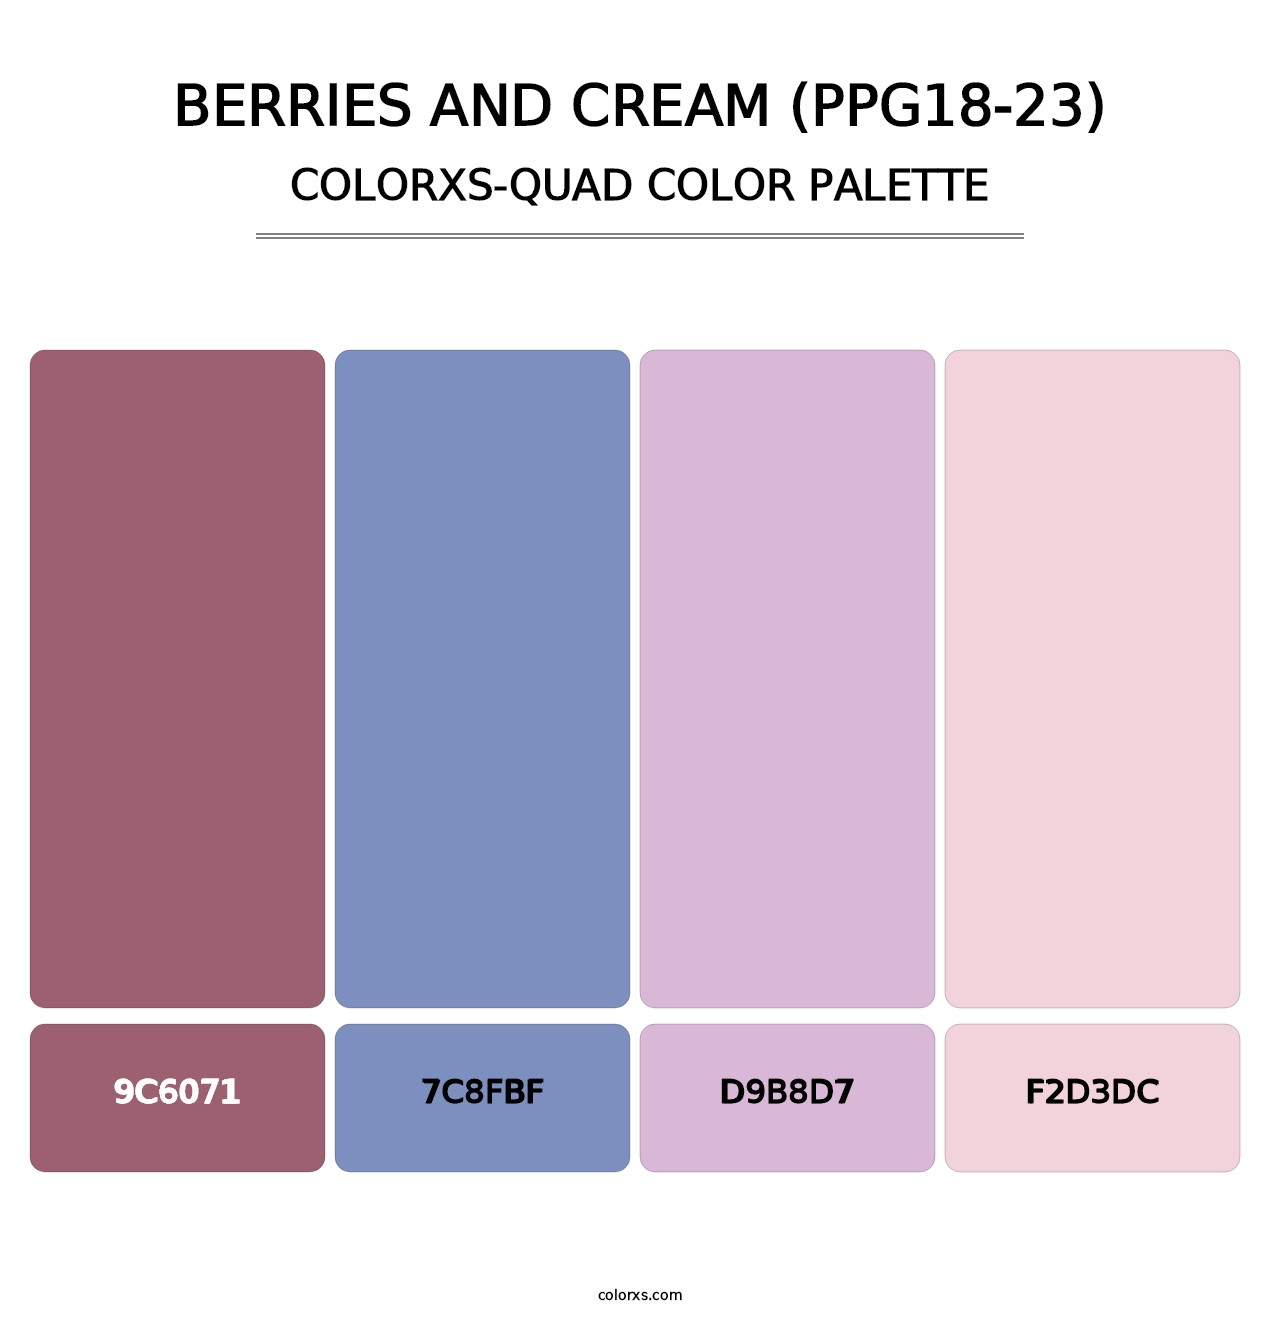 Berries And Cream (PPG18-23) - Colorxs Quad Palette